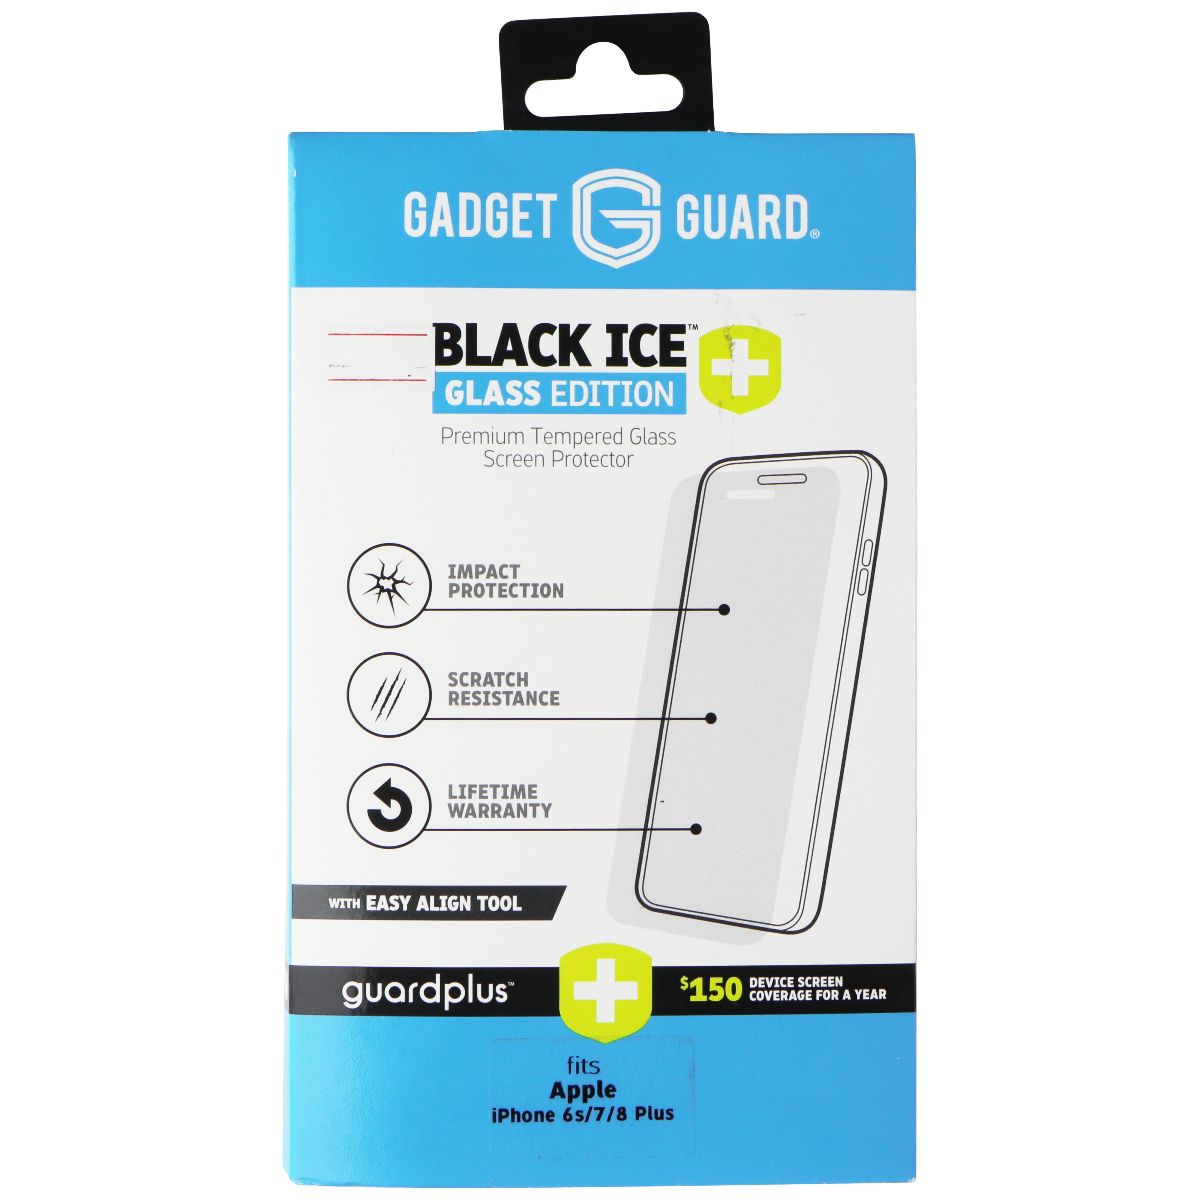 Gadget Guard Black Ice Glass Edition w/ Guard Plus for Apple iPhone 6s/7/8 Plus